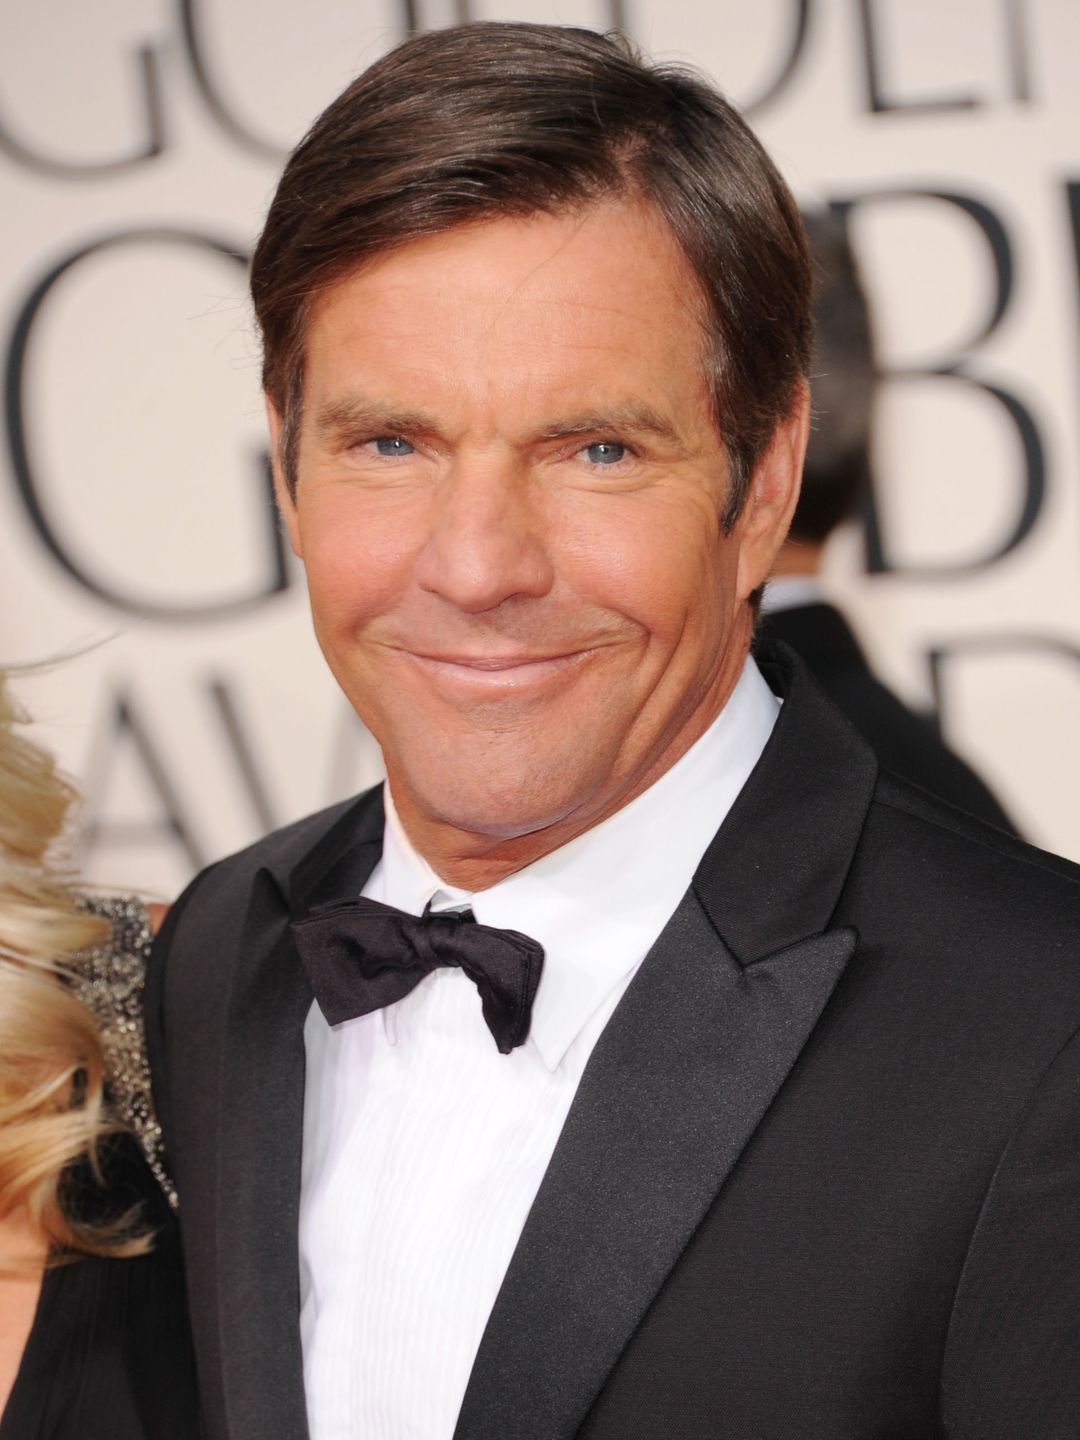 Dennis Quaid in his youth